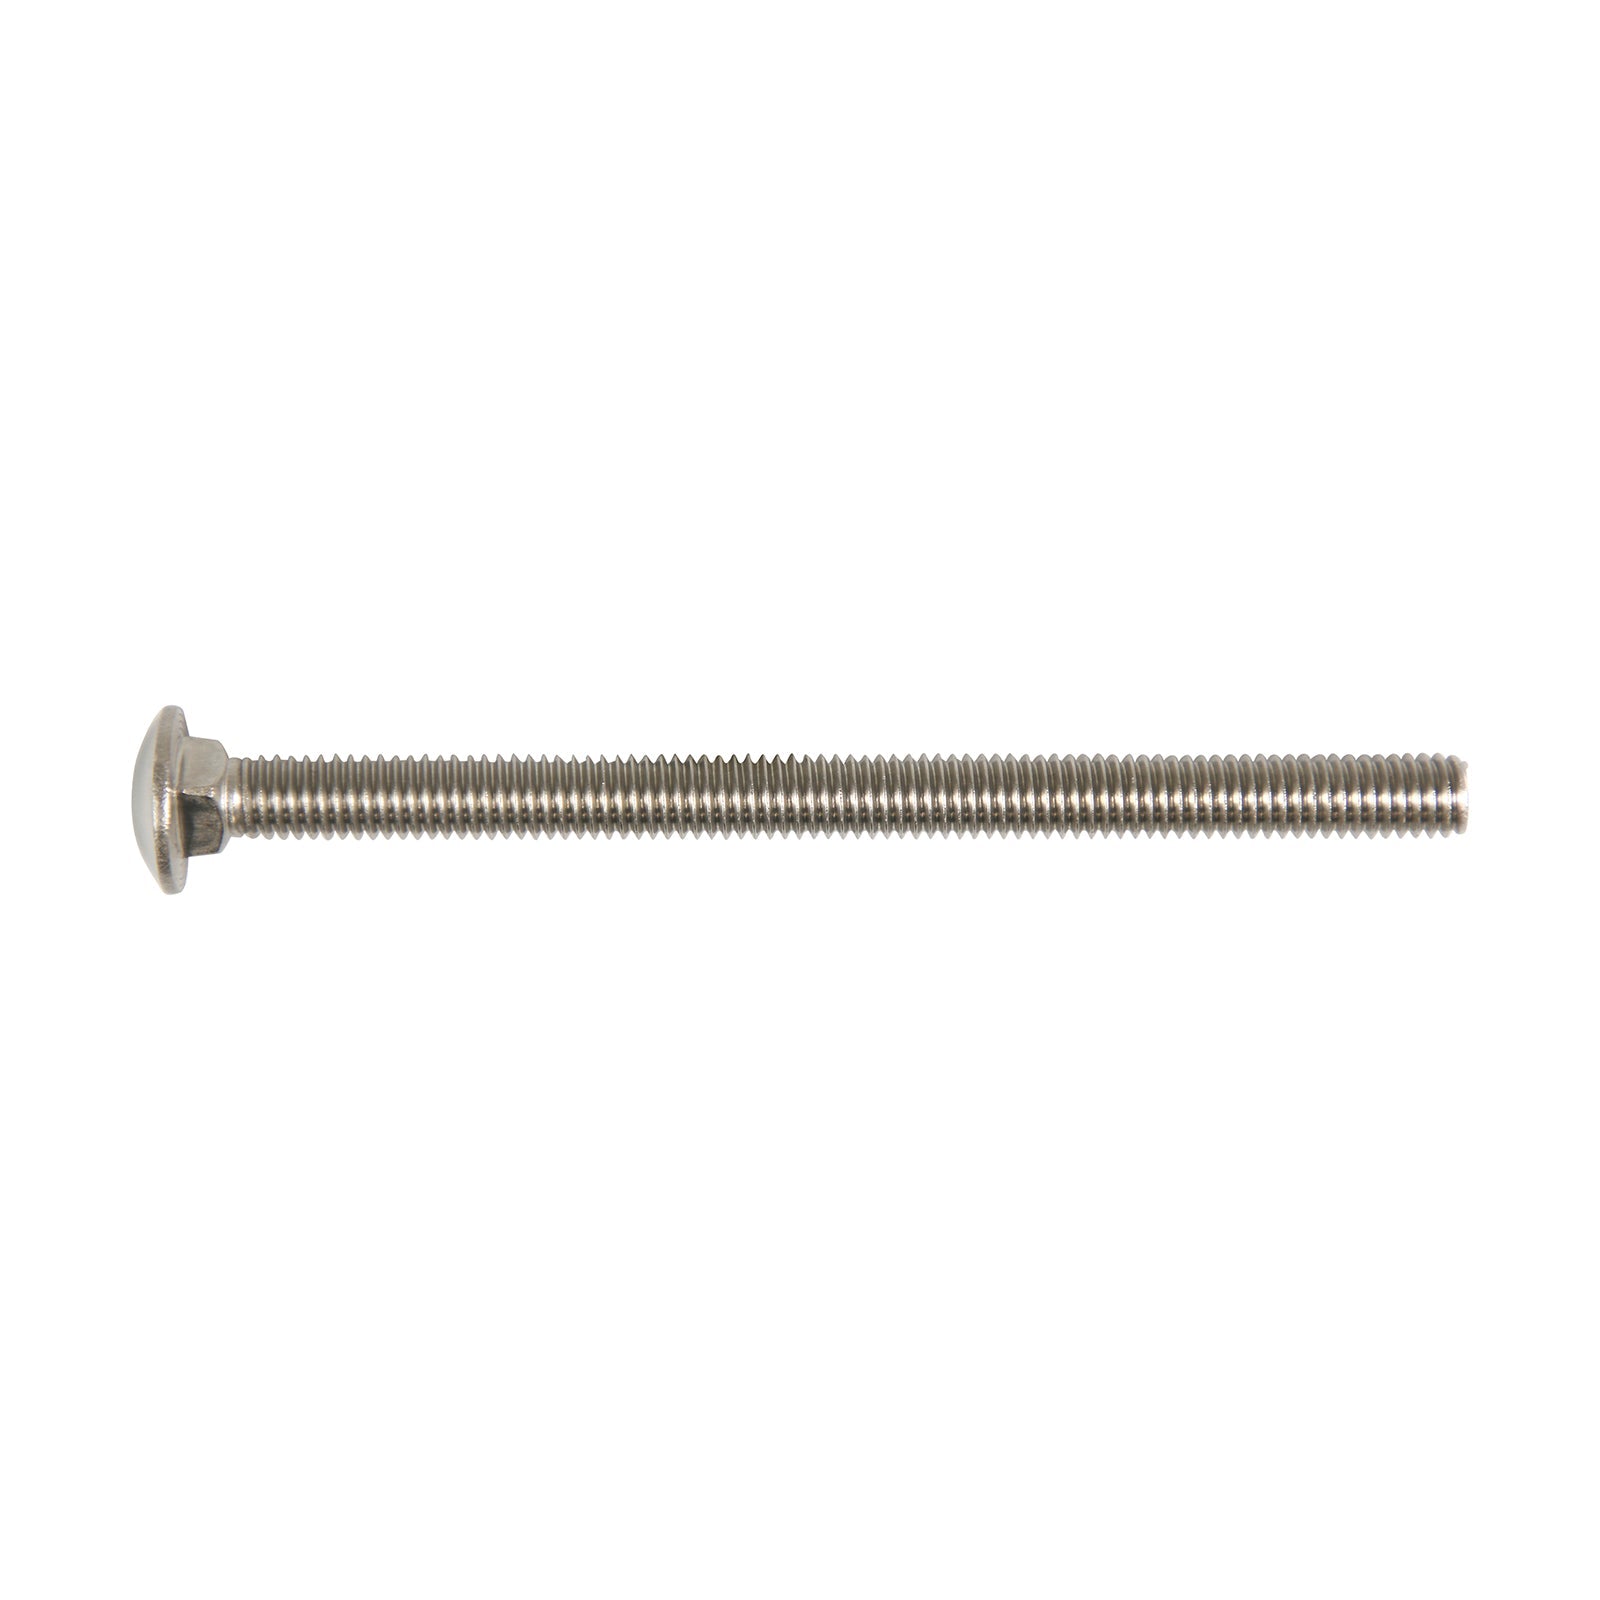 3/8"-16 x 5-1/2" Conquest Carriage Bolt - 304 Stainless Steel